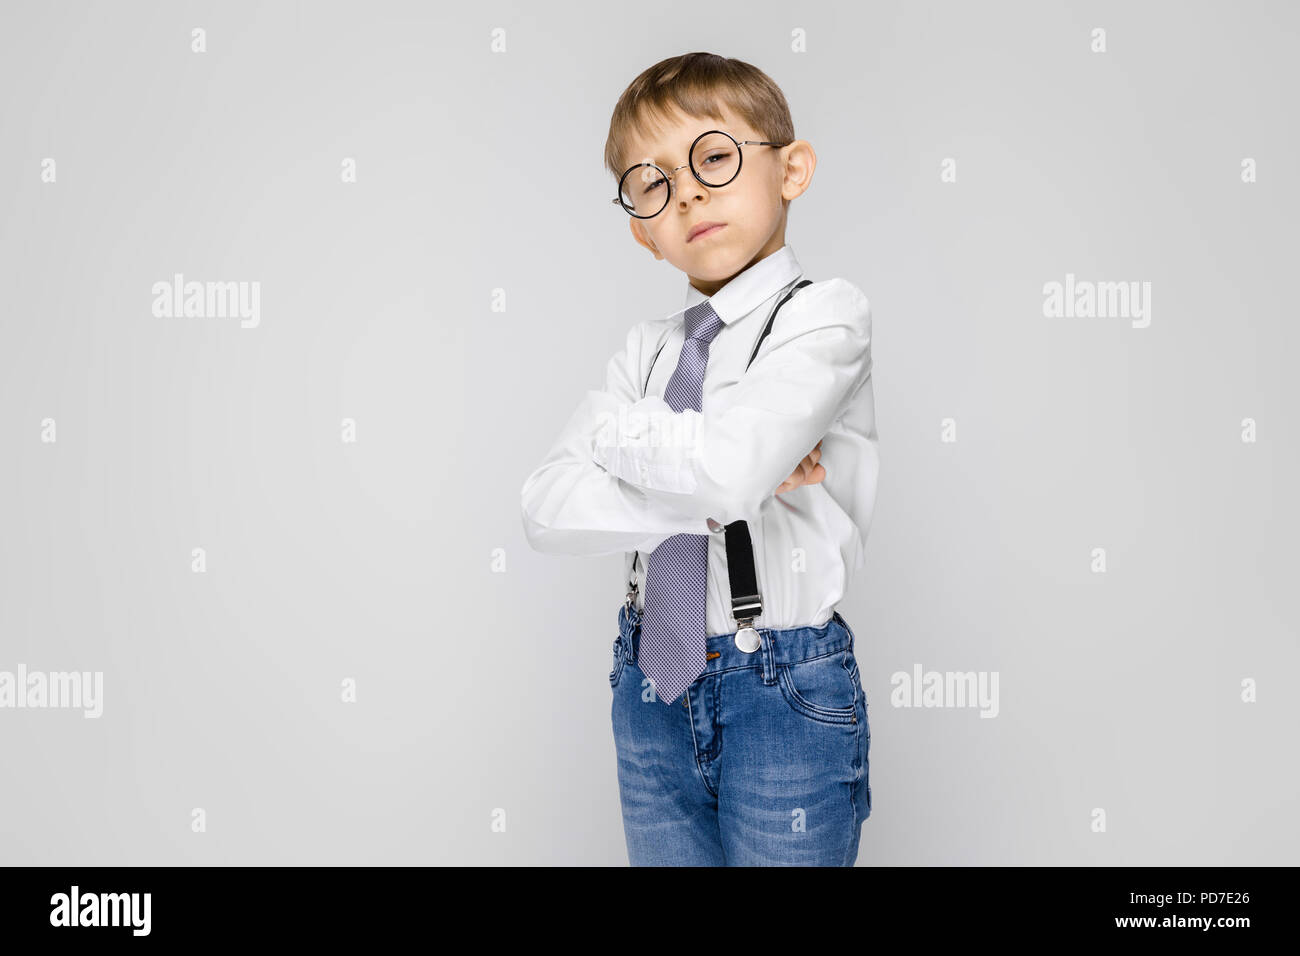 A charming boy in a white shirt, suspenders, a tie and light jeans stands  on a gray background. The boy folded his arms over his chest Stock Photo -  Alamy